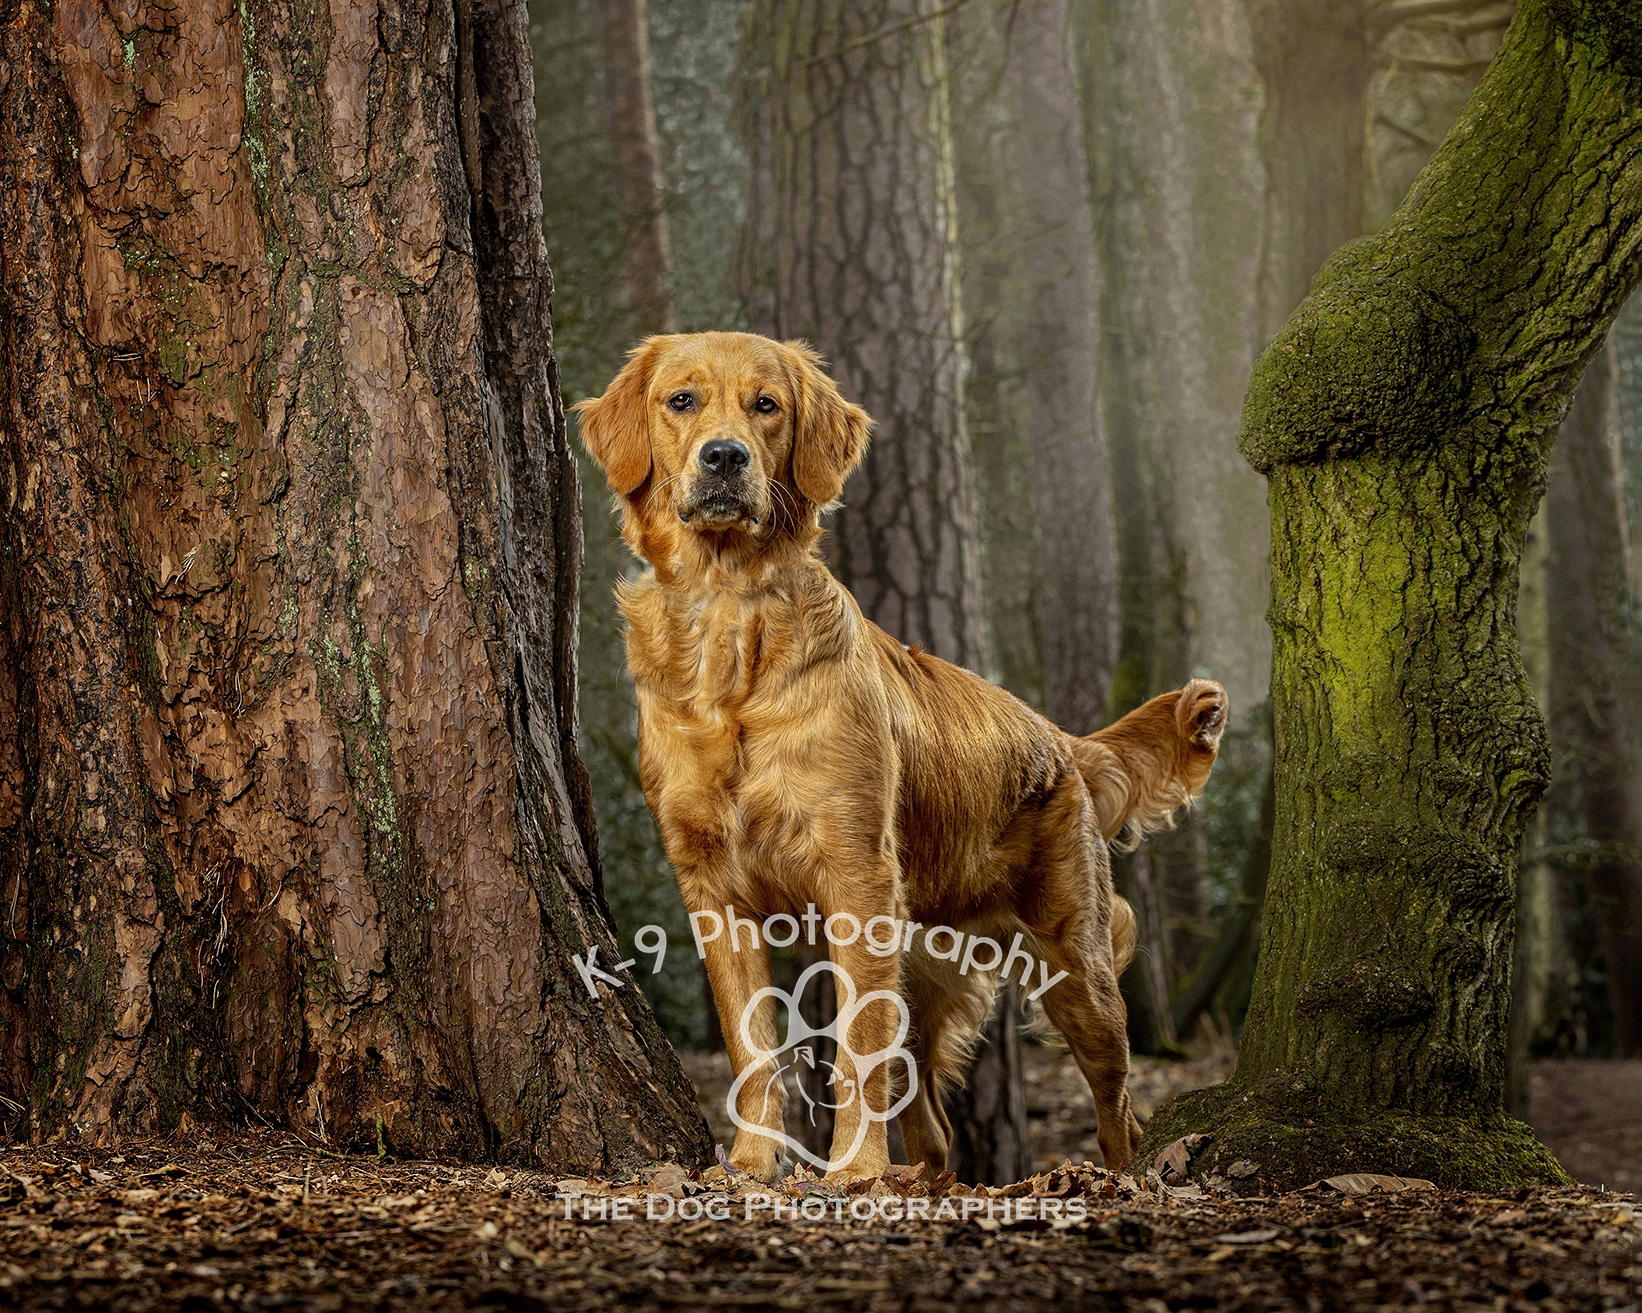 Beautiful dog photography of a Golden Retriever on location by specialist dog photographer Adrian Bullers